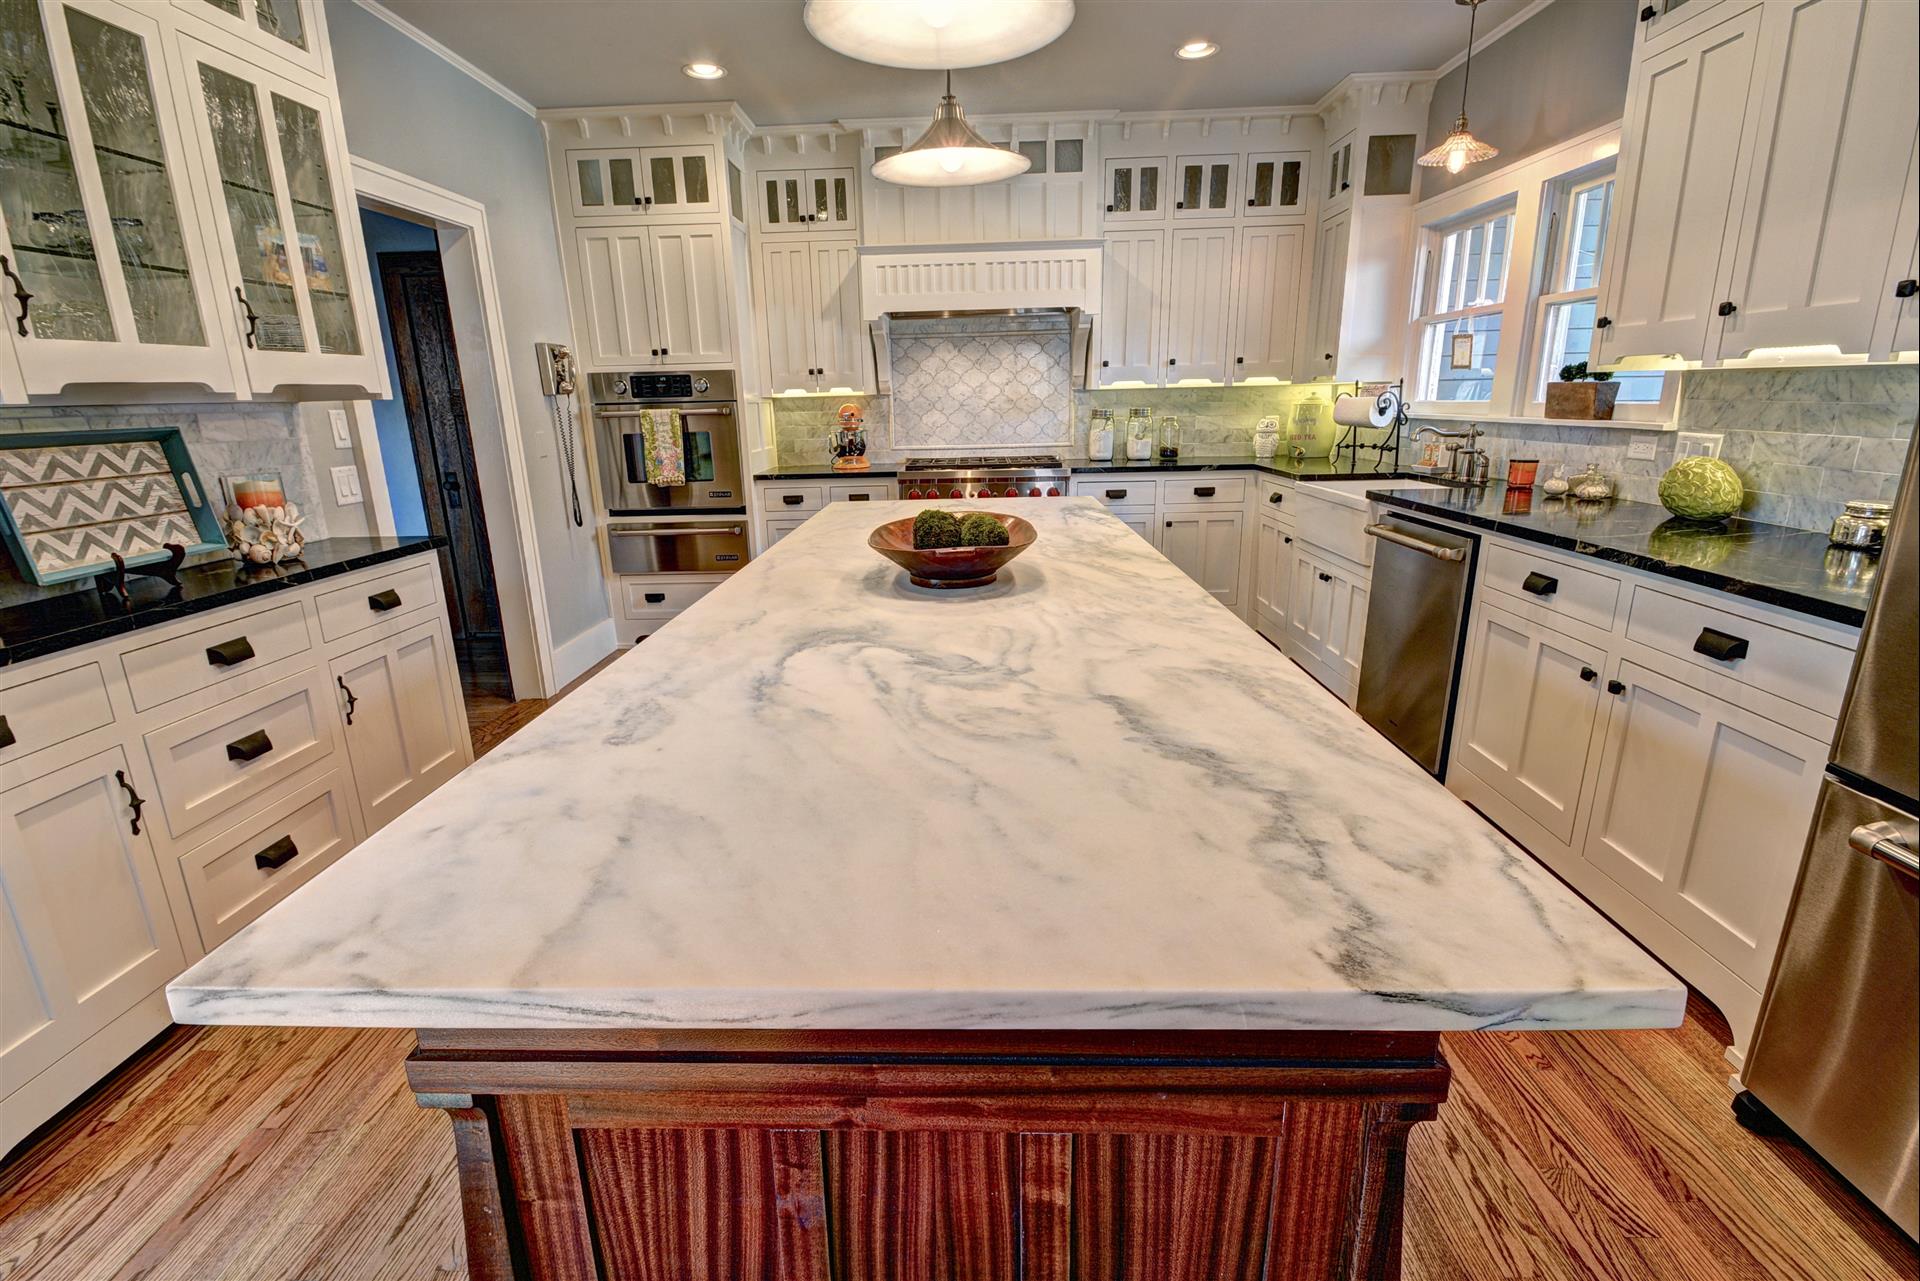 How To Select The Right Granite For Your Kitchen Countertops